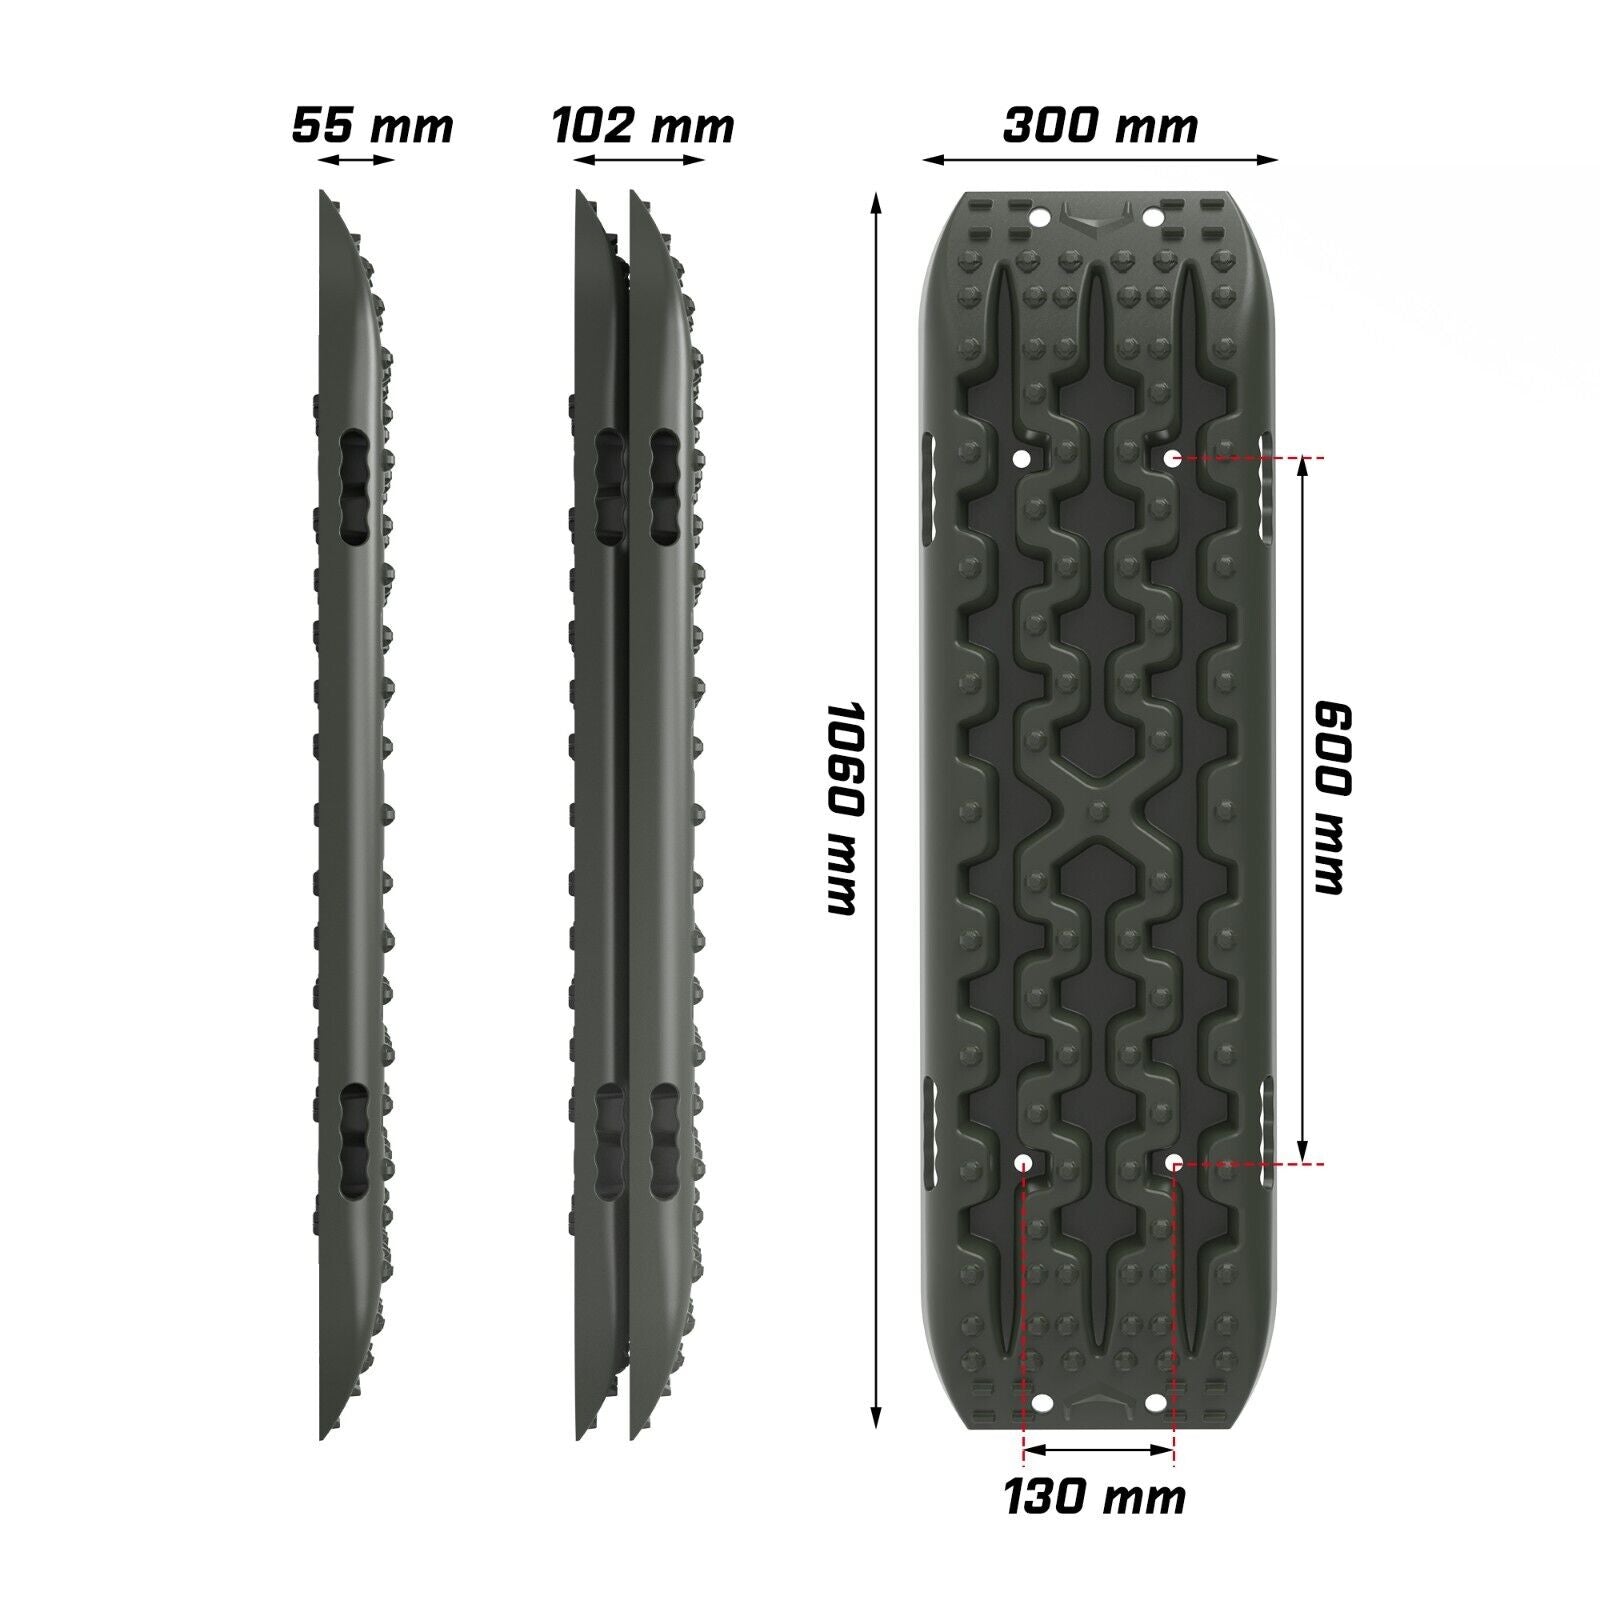 X-BULL Recovery tracks kit Boards 4WD strap mounting 4x4 Sand Snow Car qrange GEN3.0 6pcs OLIVE Deals499